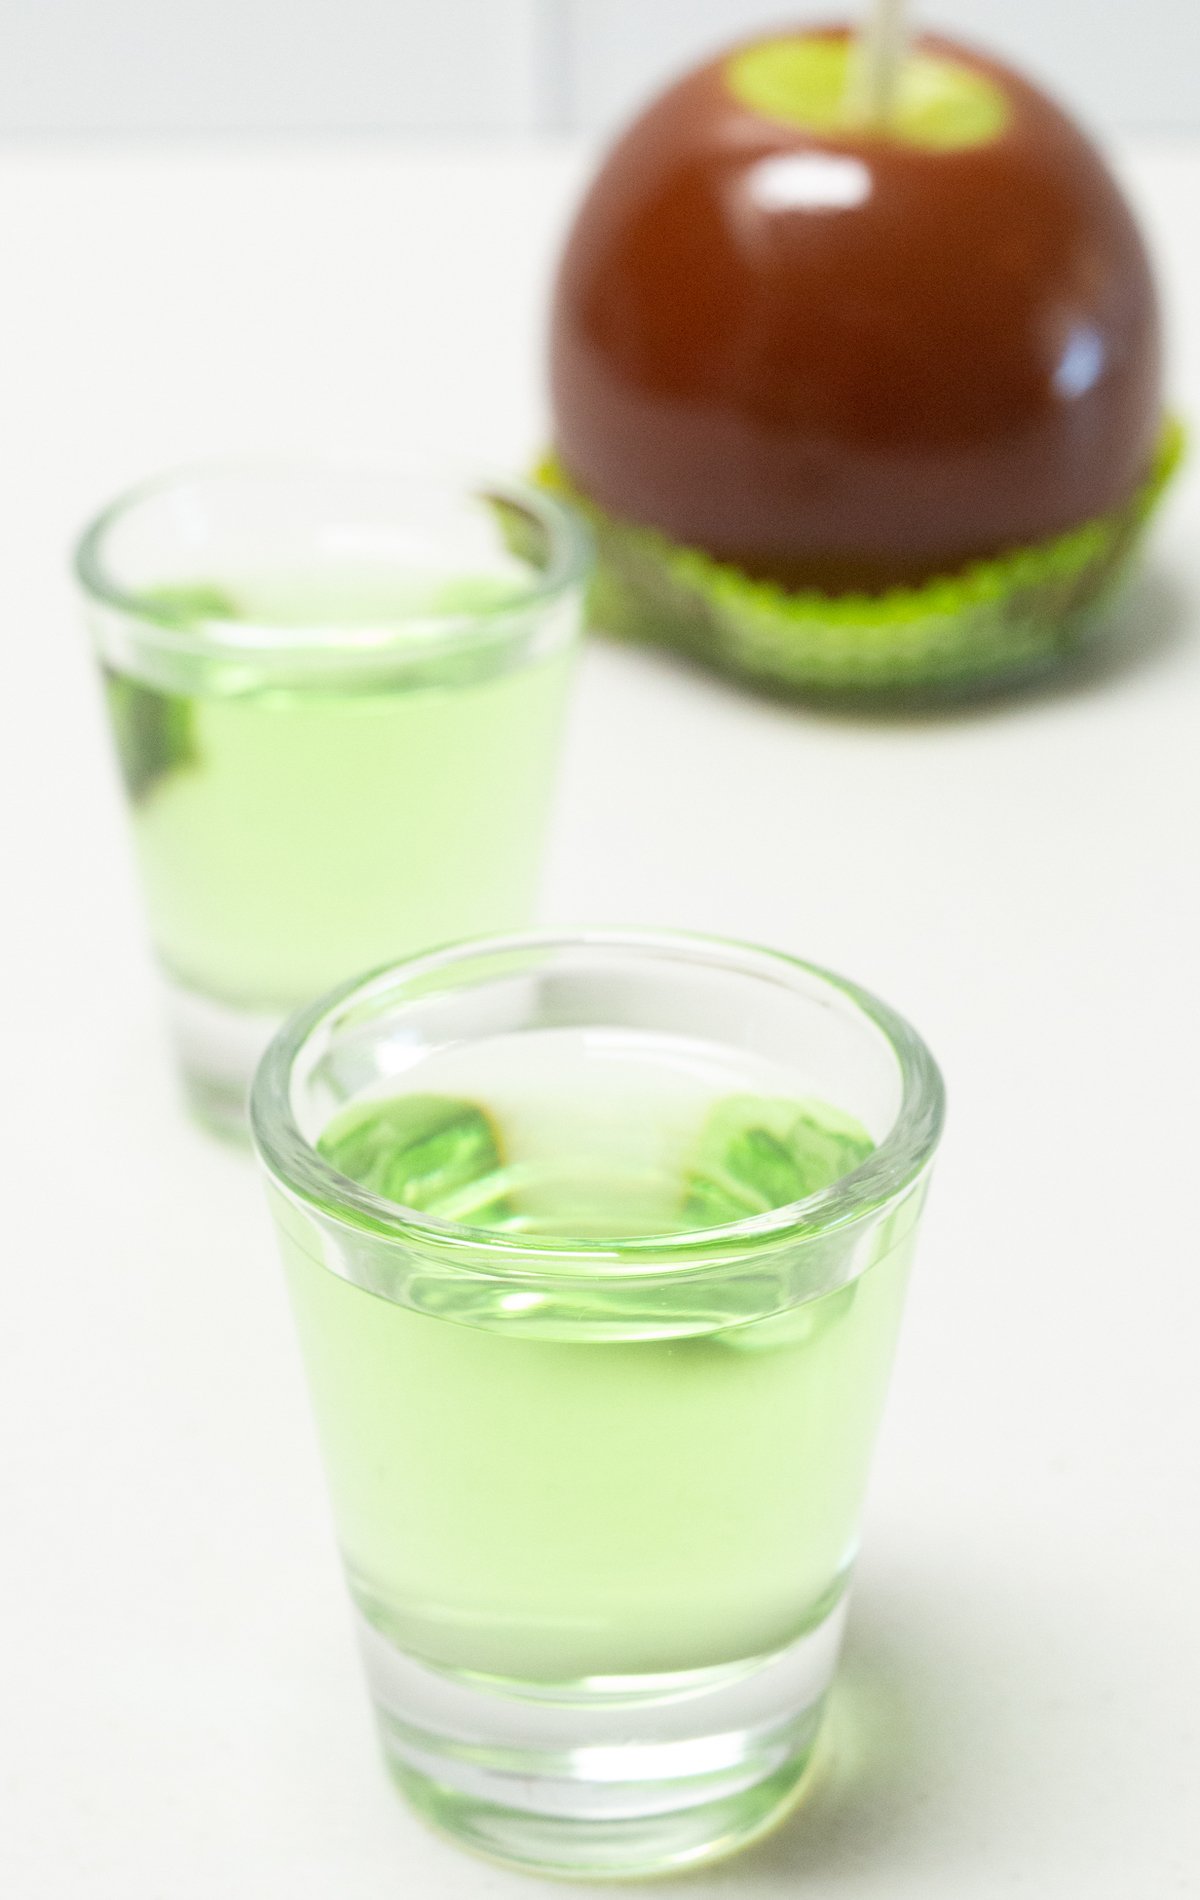 Two shot glasses filled with green caramel apple shots on a white background.